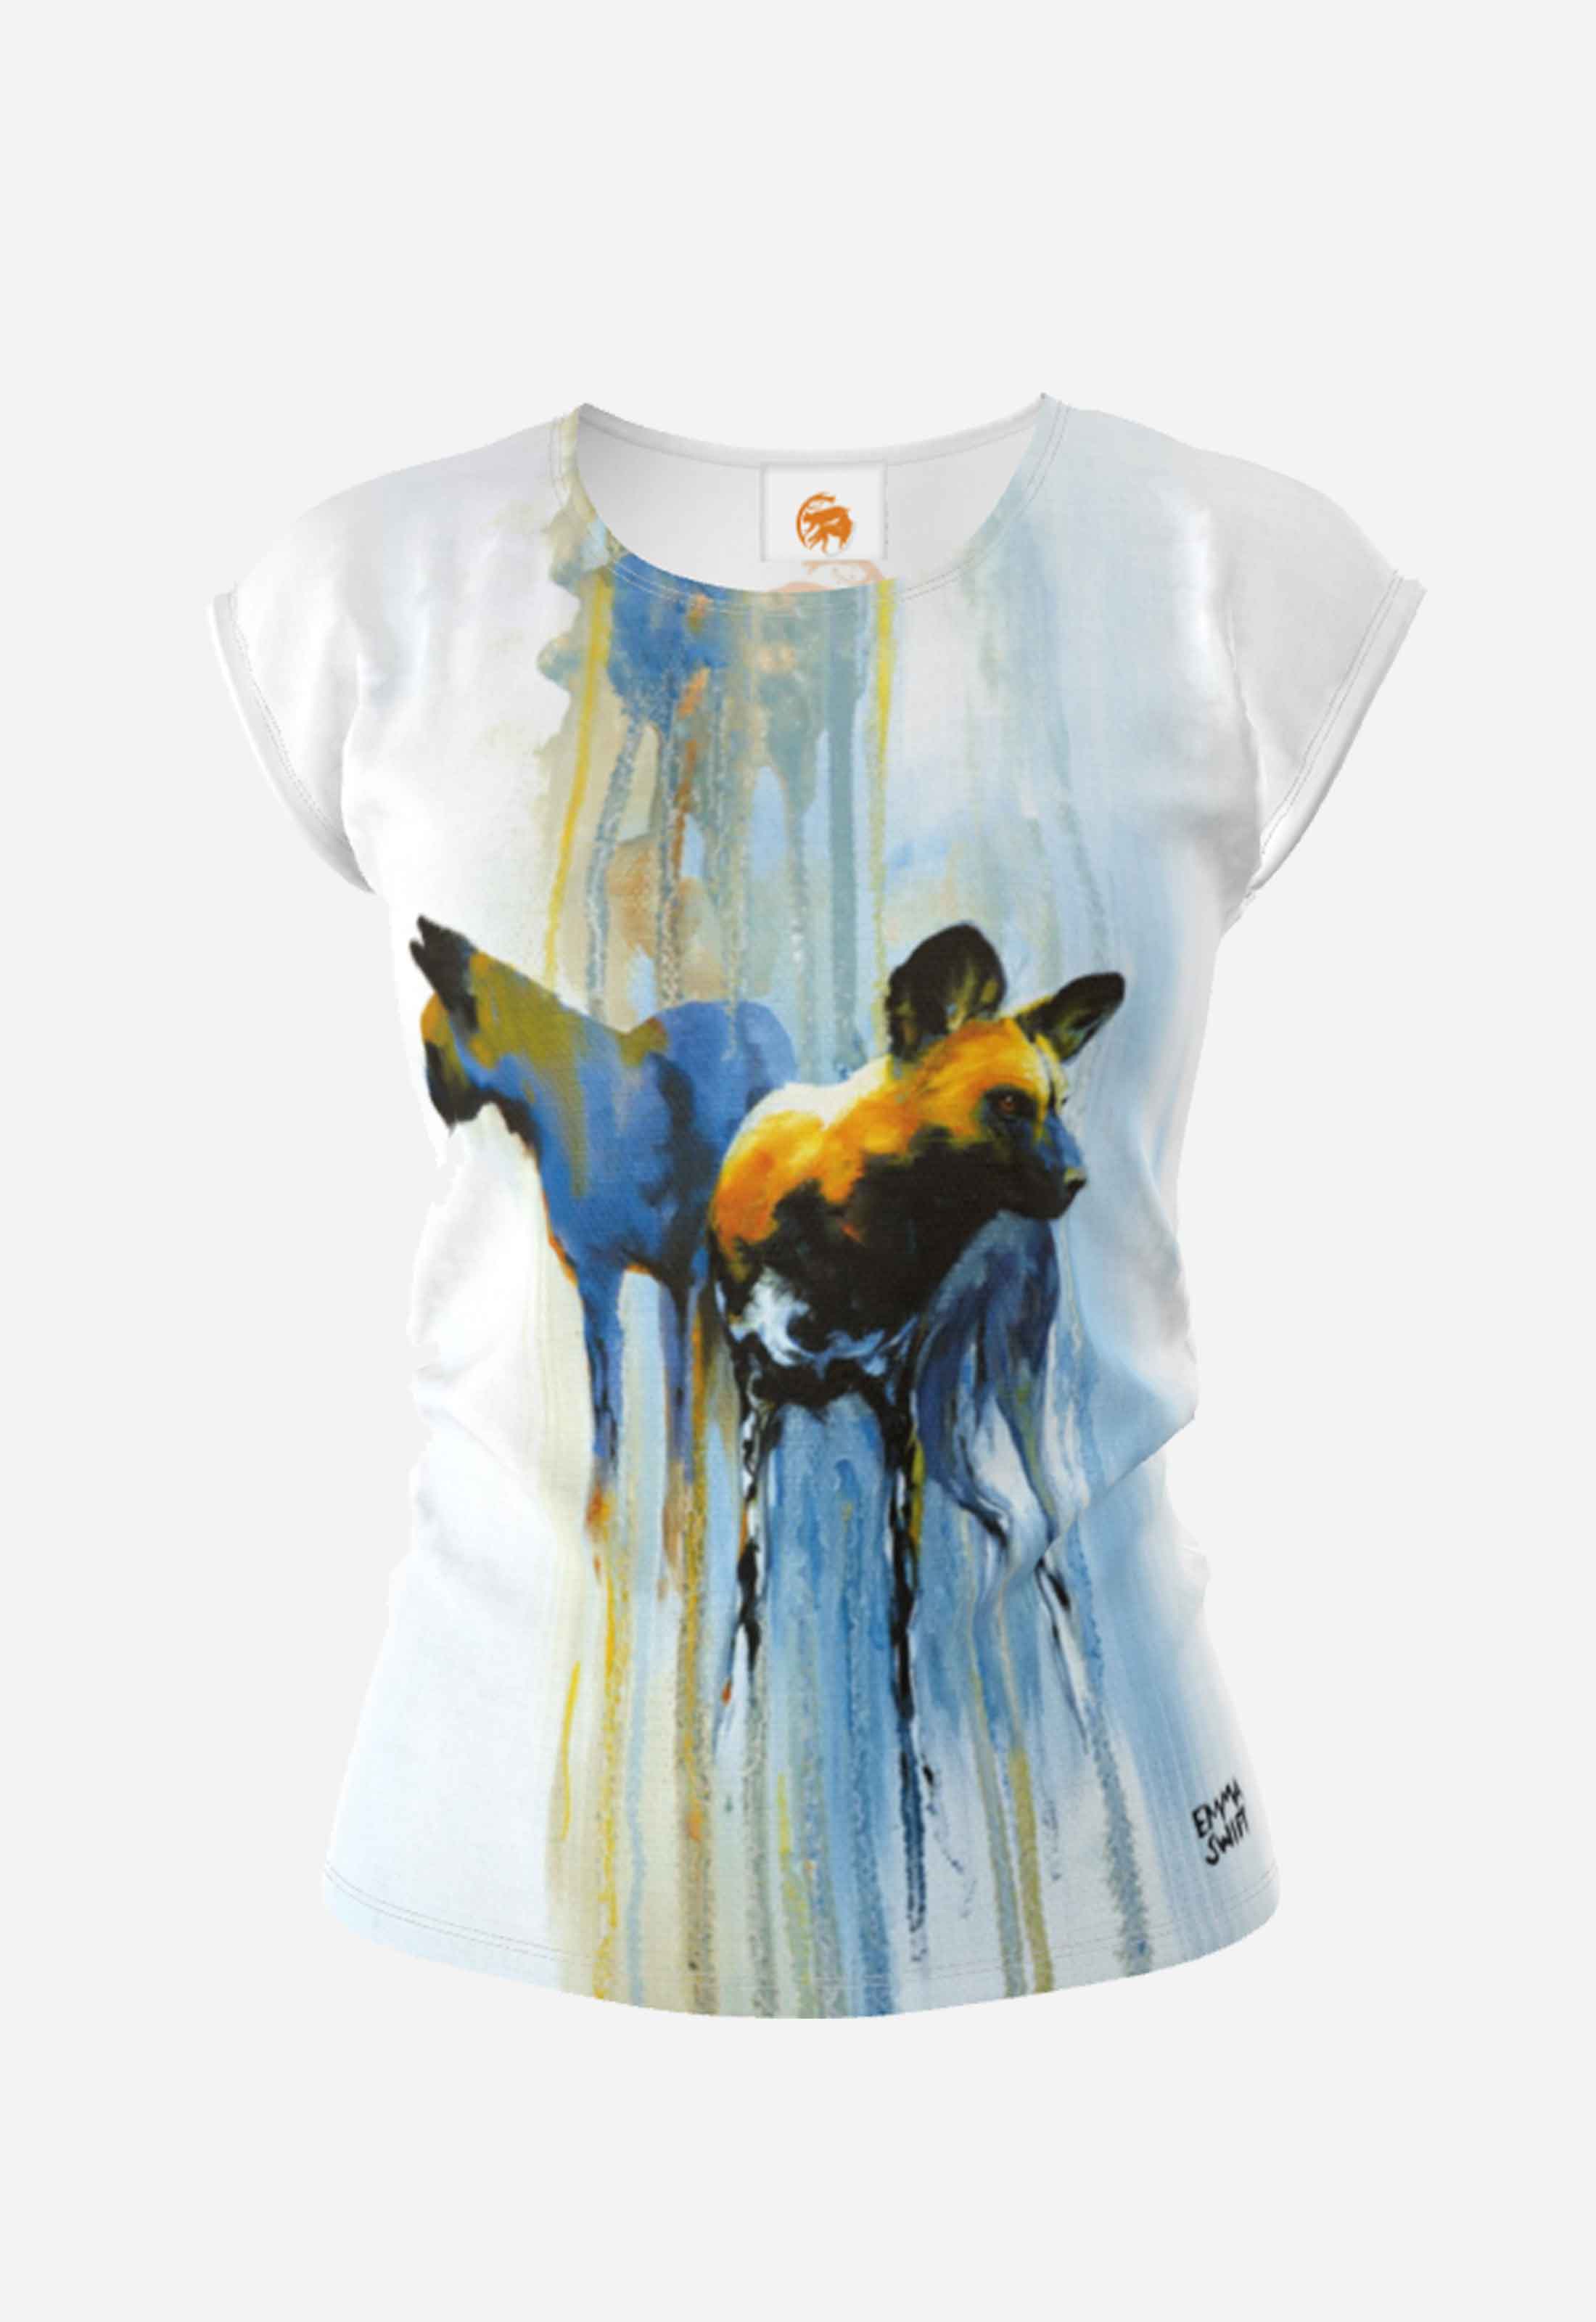 Main image for Painted Dogs Women's T-Shirt